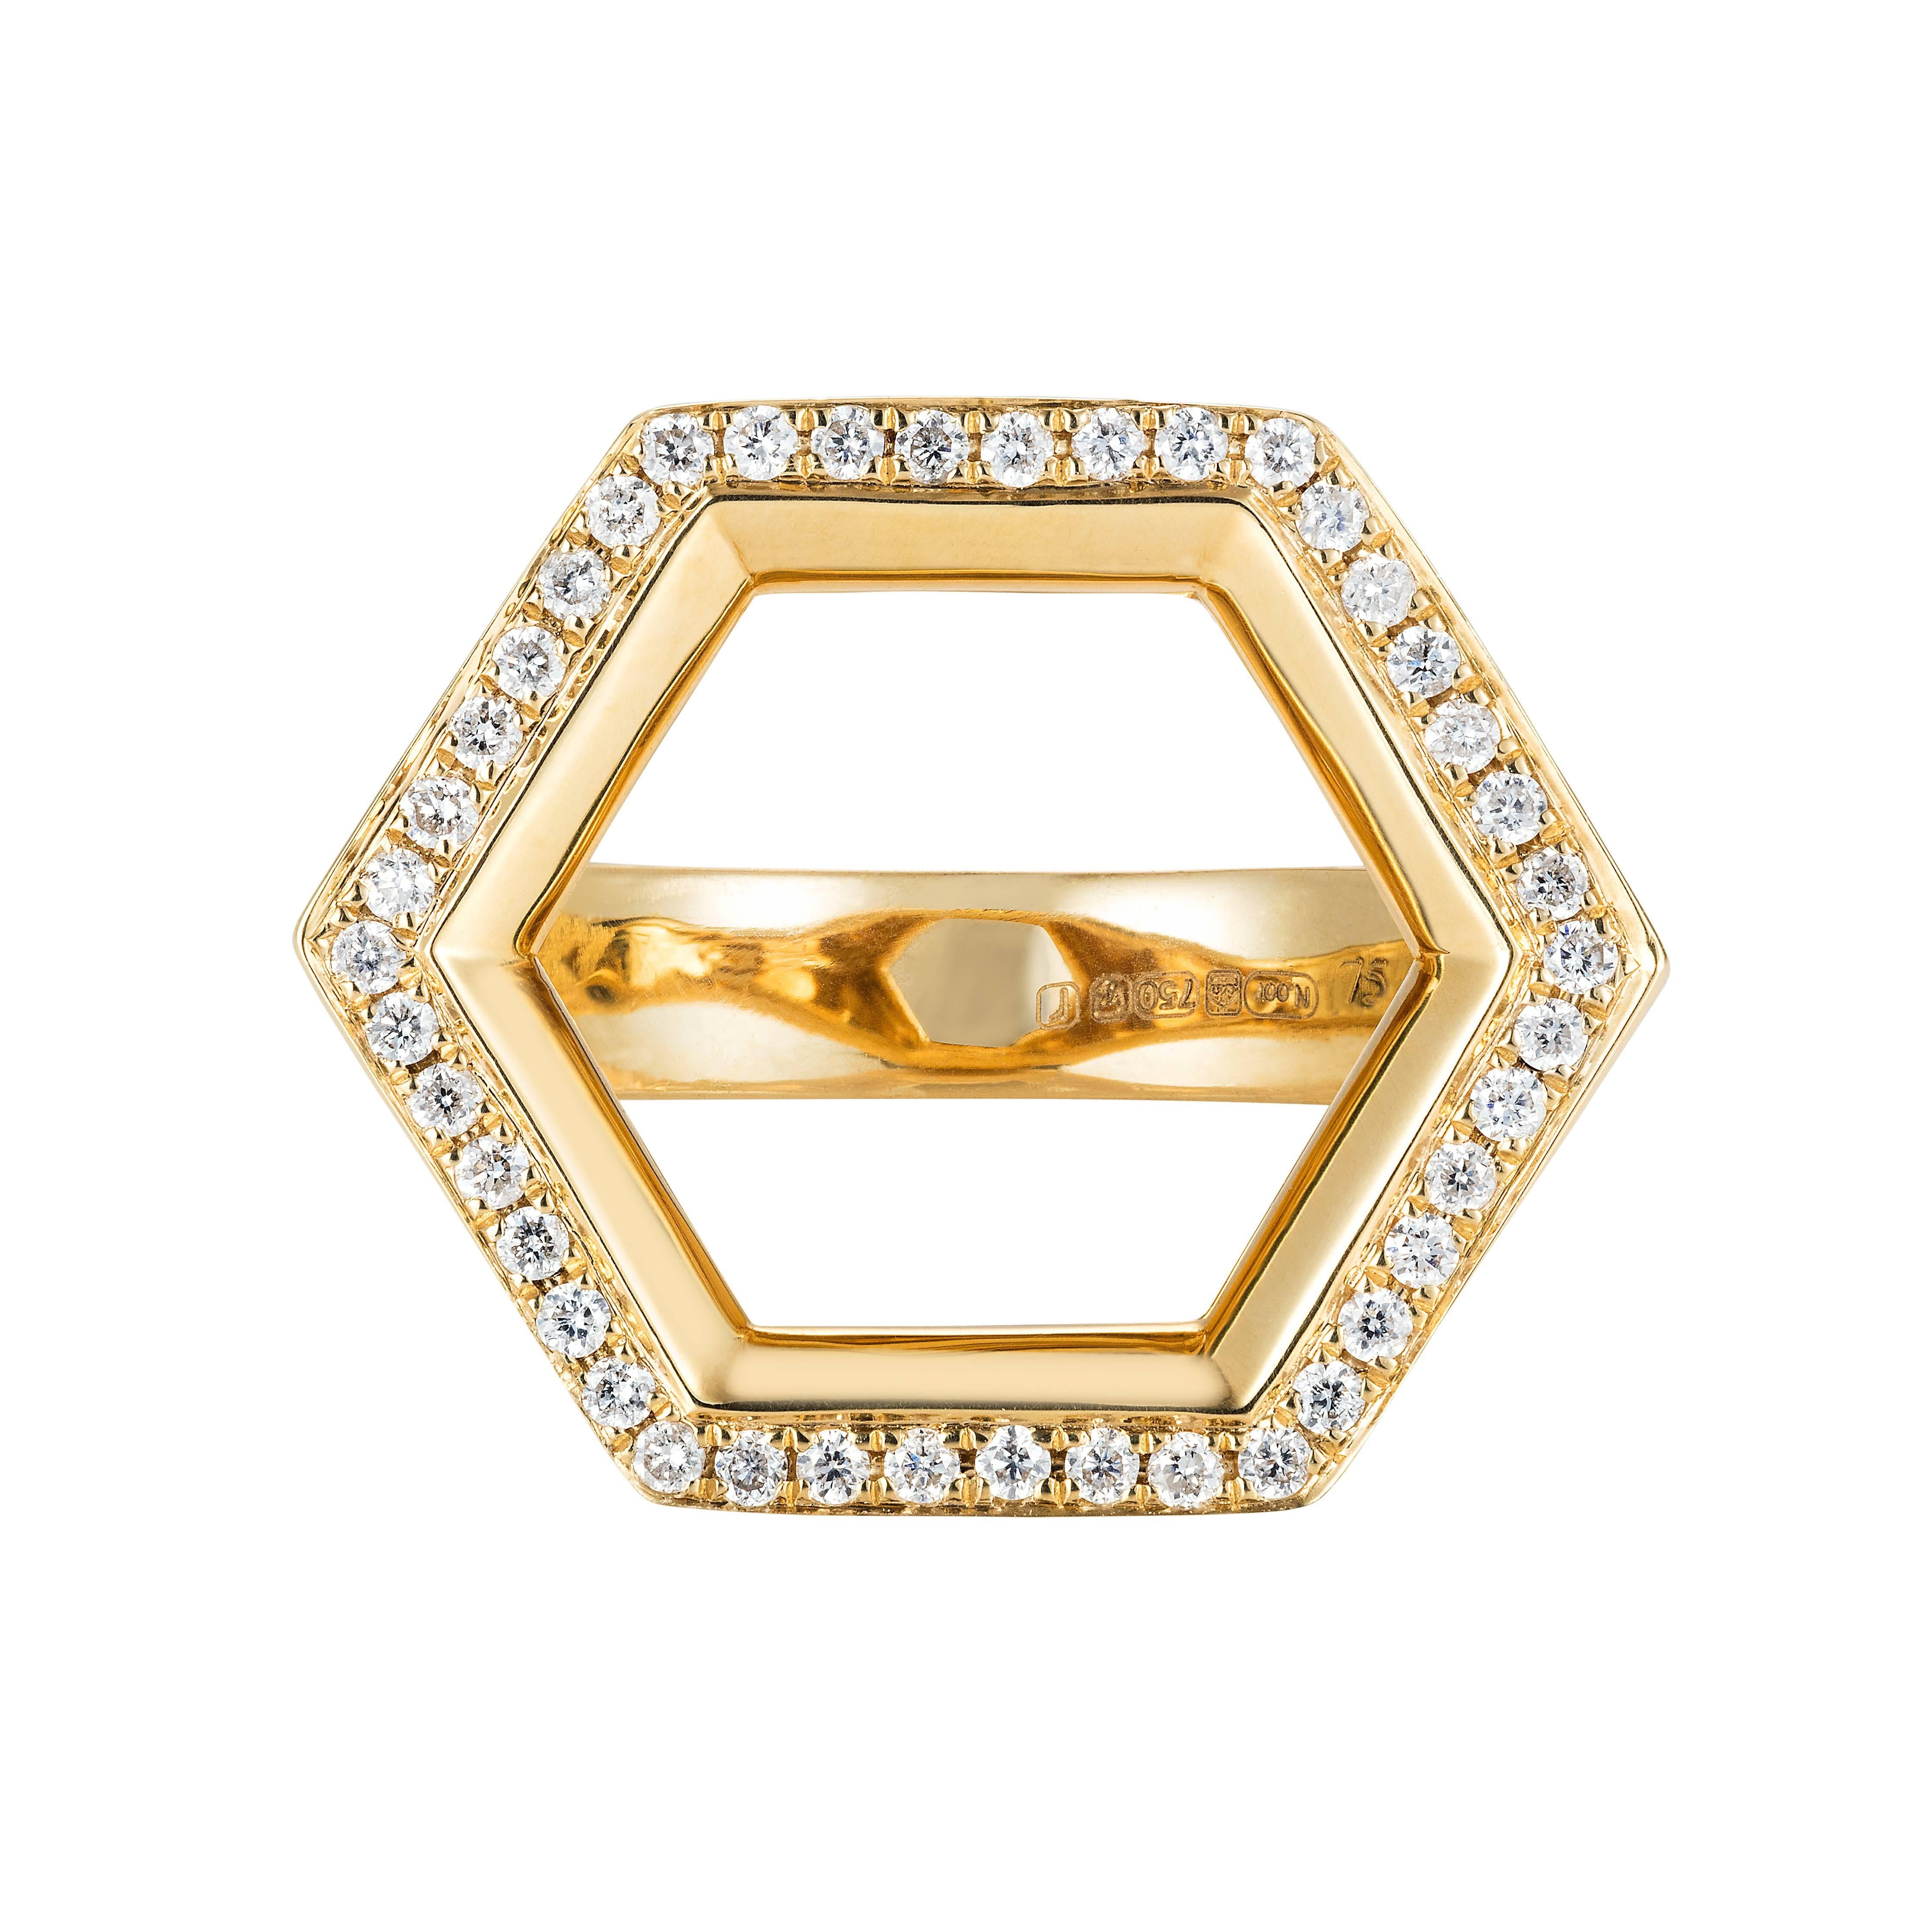 - 18K Yellow Gold (10.56 gr.)
- White Diamonds (H - Is / 42 ∅ / 0.22 cts.)

- Size: 51, 52 and 53